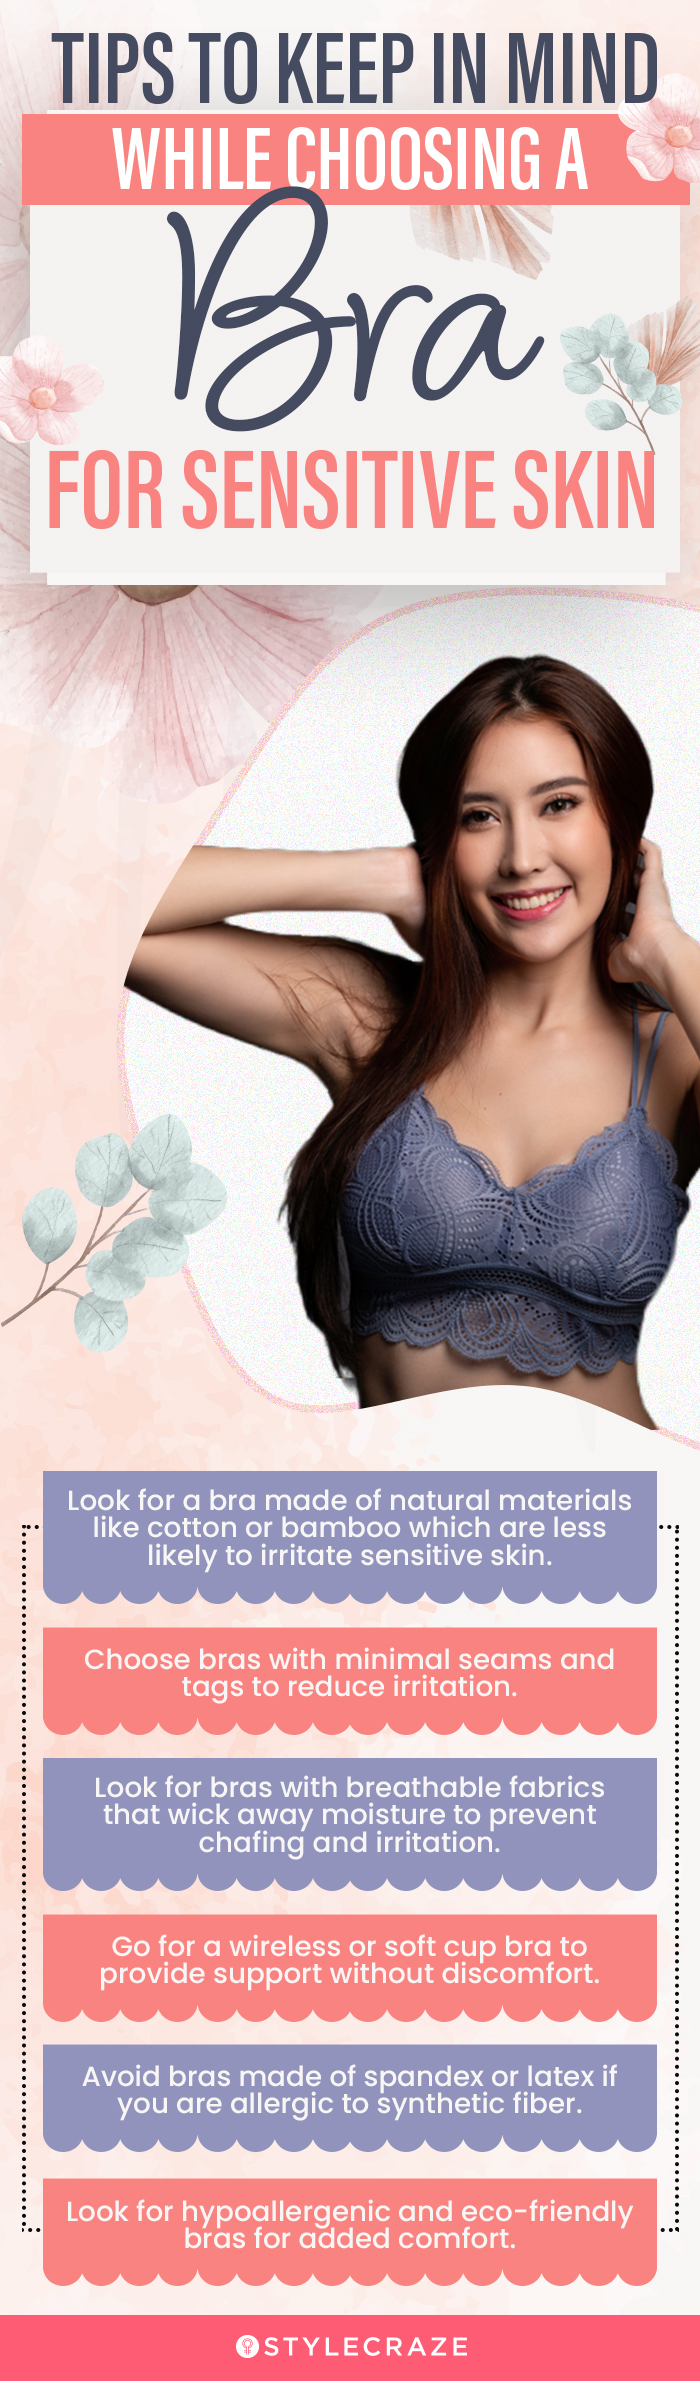 Tips To Keep In Mind While Choosing A Bra For Sensitive Skin (infographic)